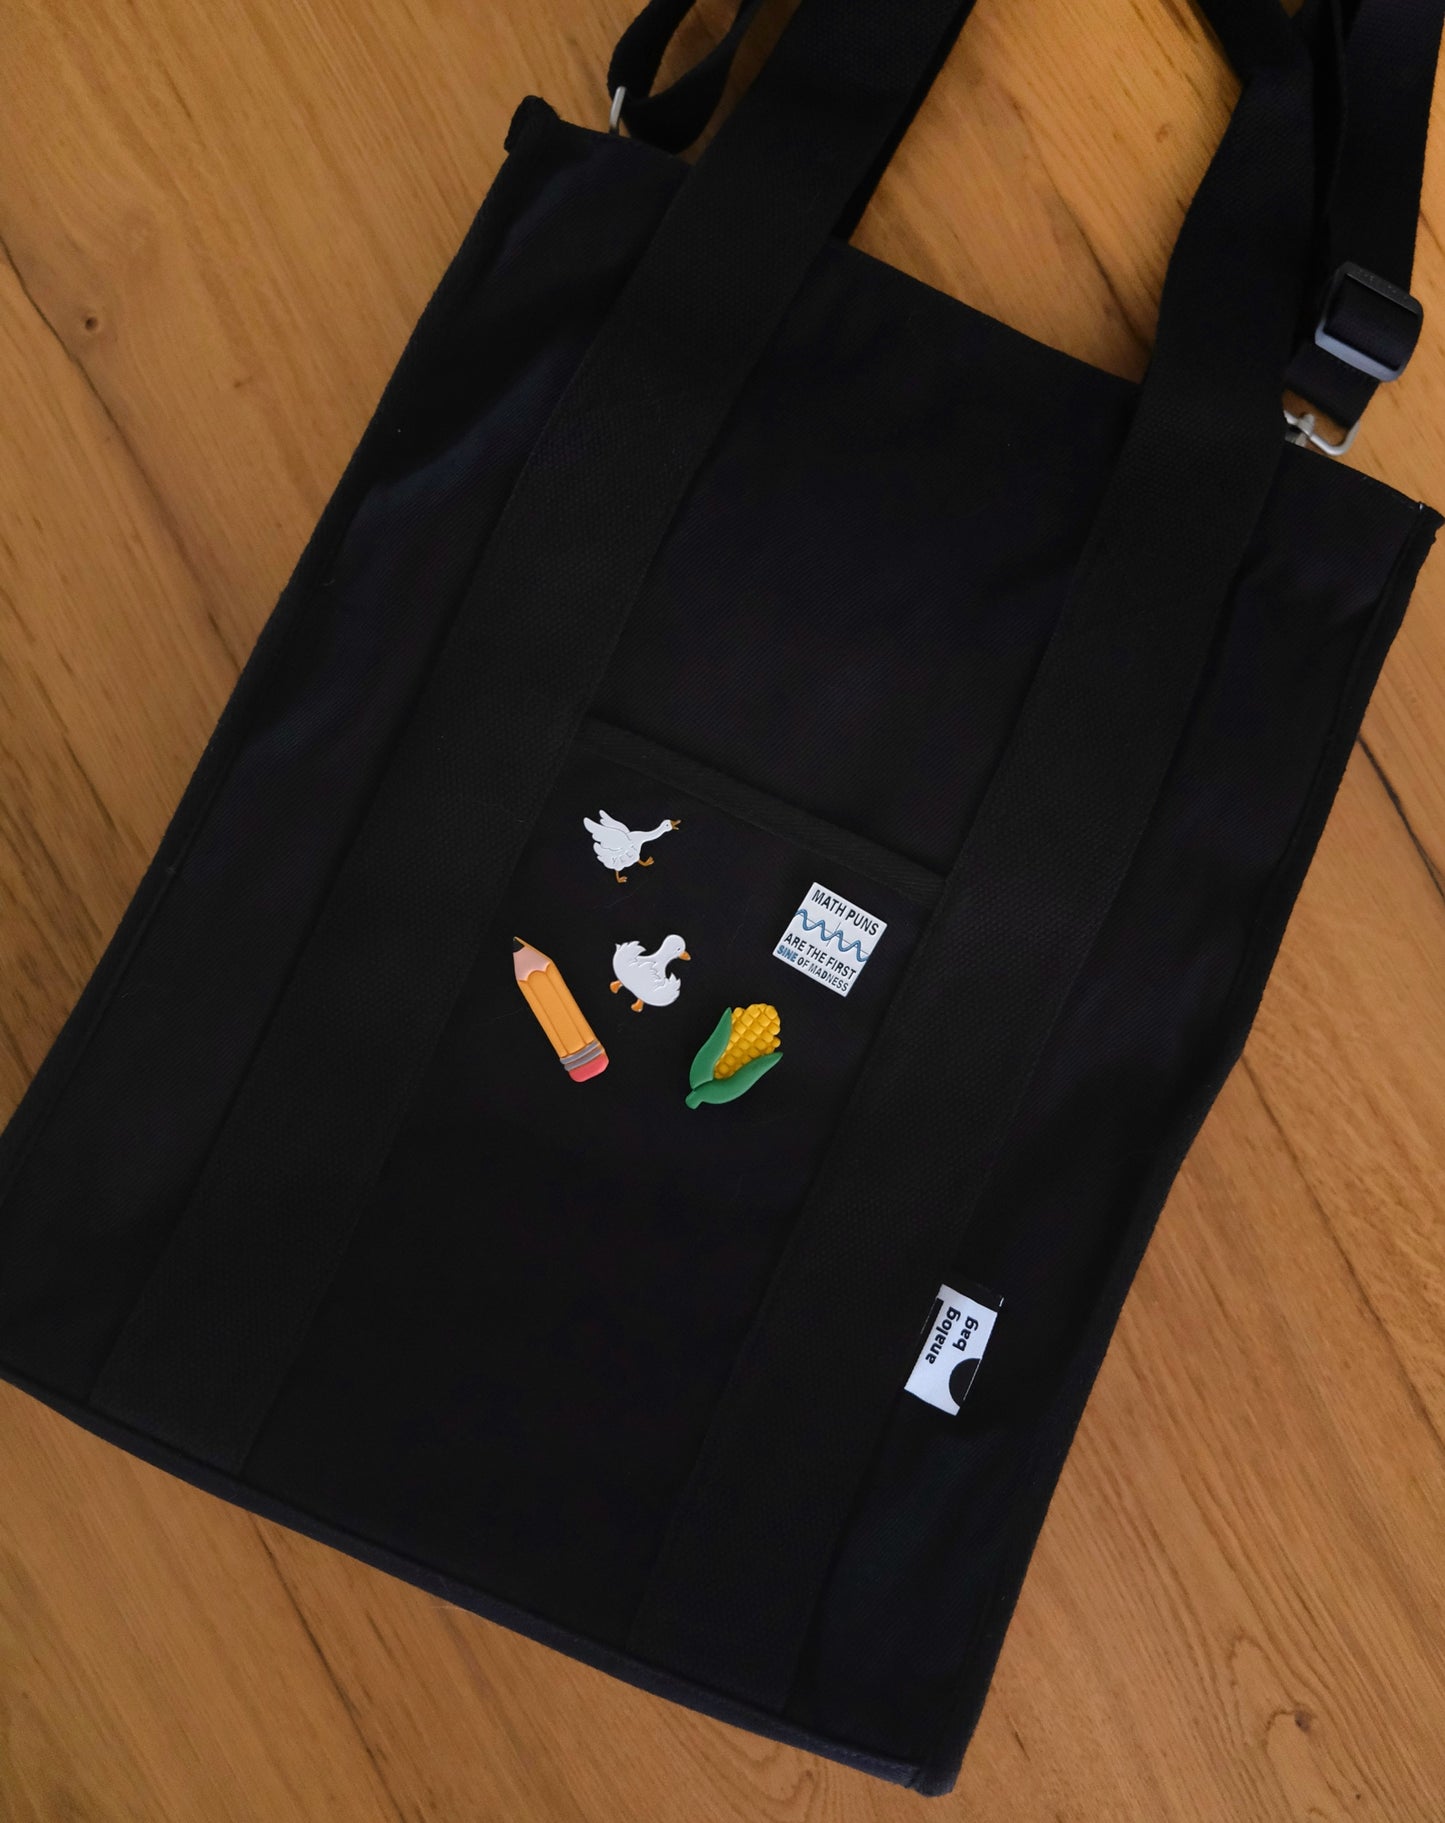 The Black XL Laptop Tote (Water Repellent)